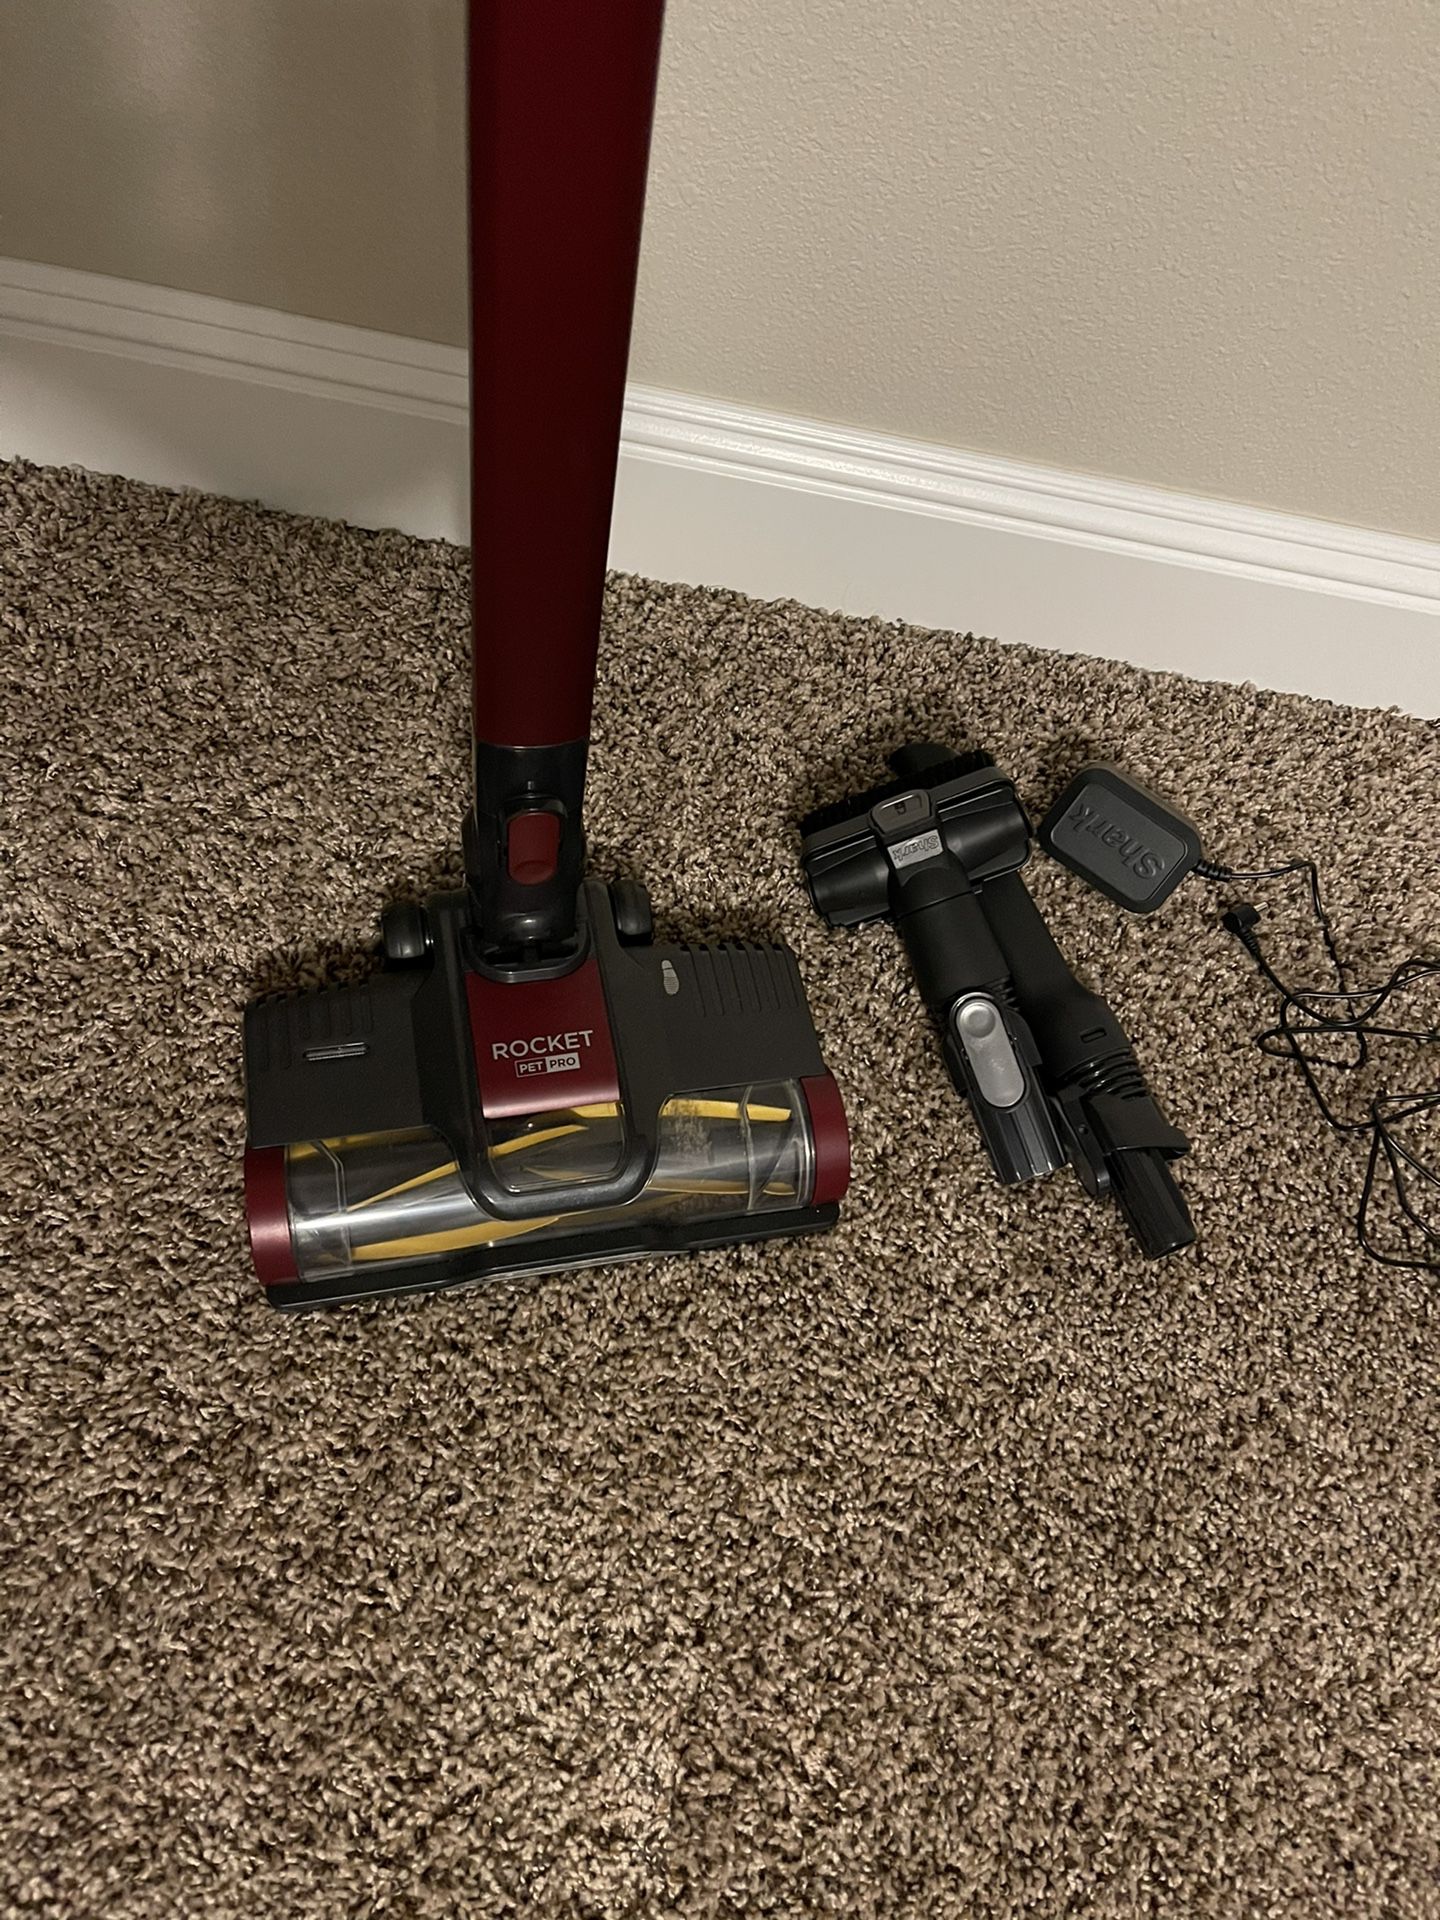 Brand new Cordless Shark vacuum (Best Offer Accepted)